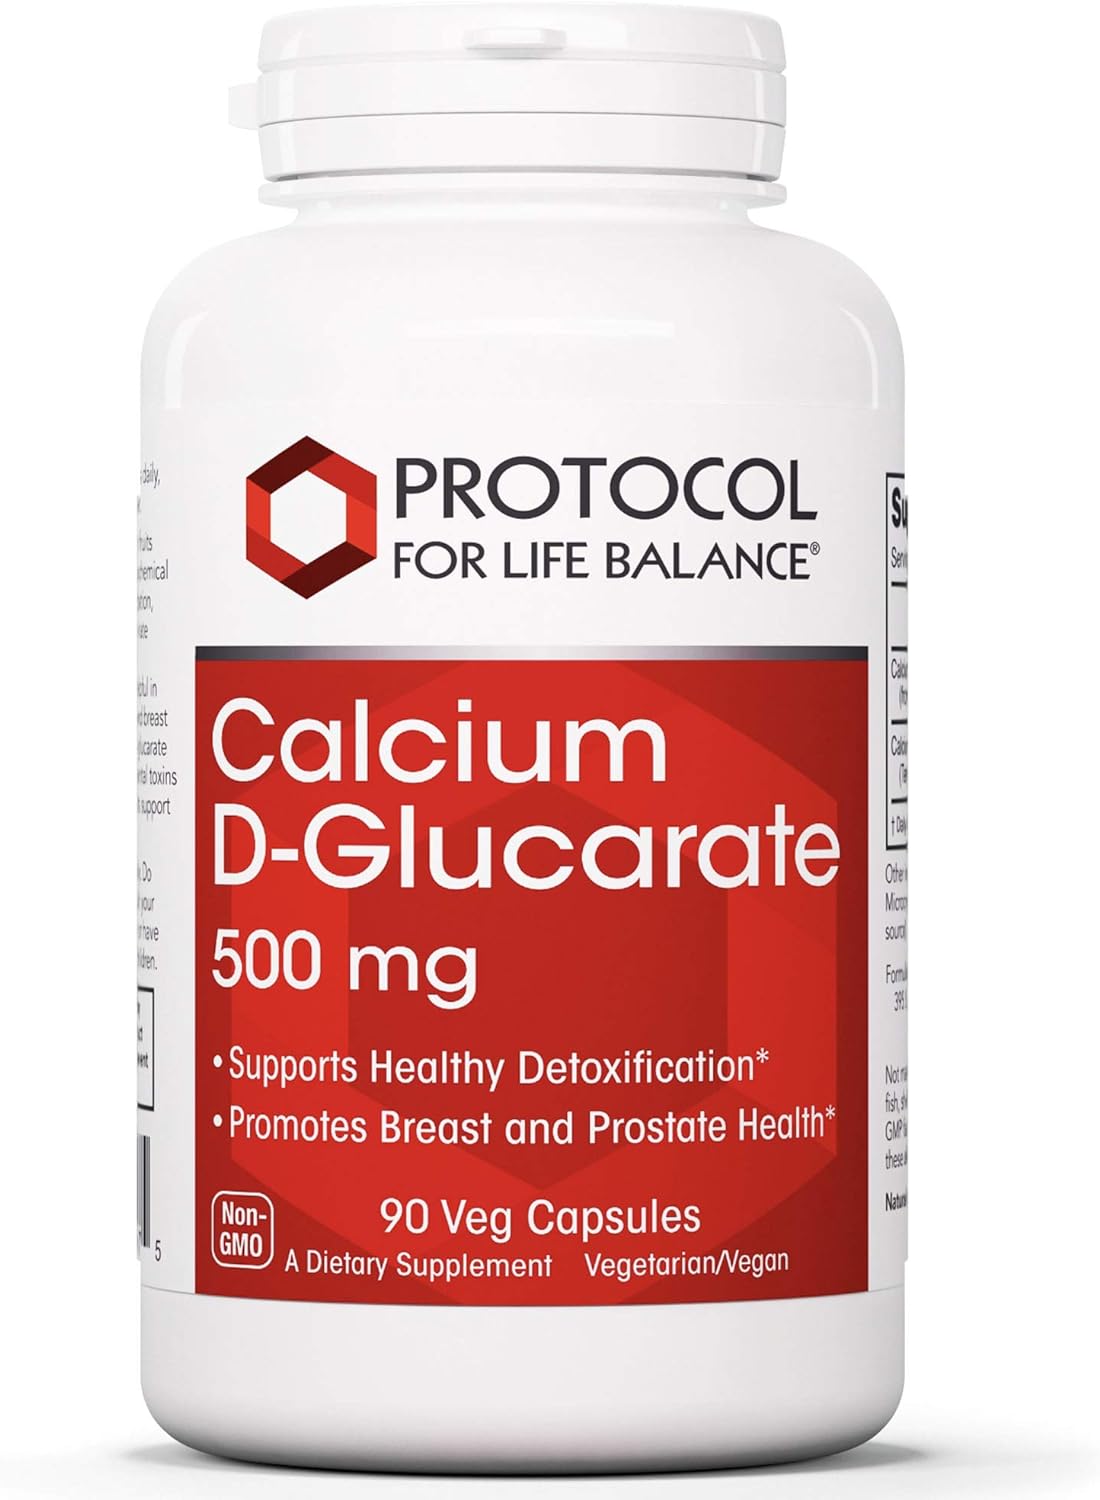 Protocol For Life Balance - Calcium D Glucarate 500mg - Supports Detoxification, Promotes Liver Detox, Breast, Colon and Prostate Health - 90 Vegetable Capsules